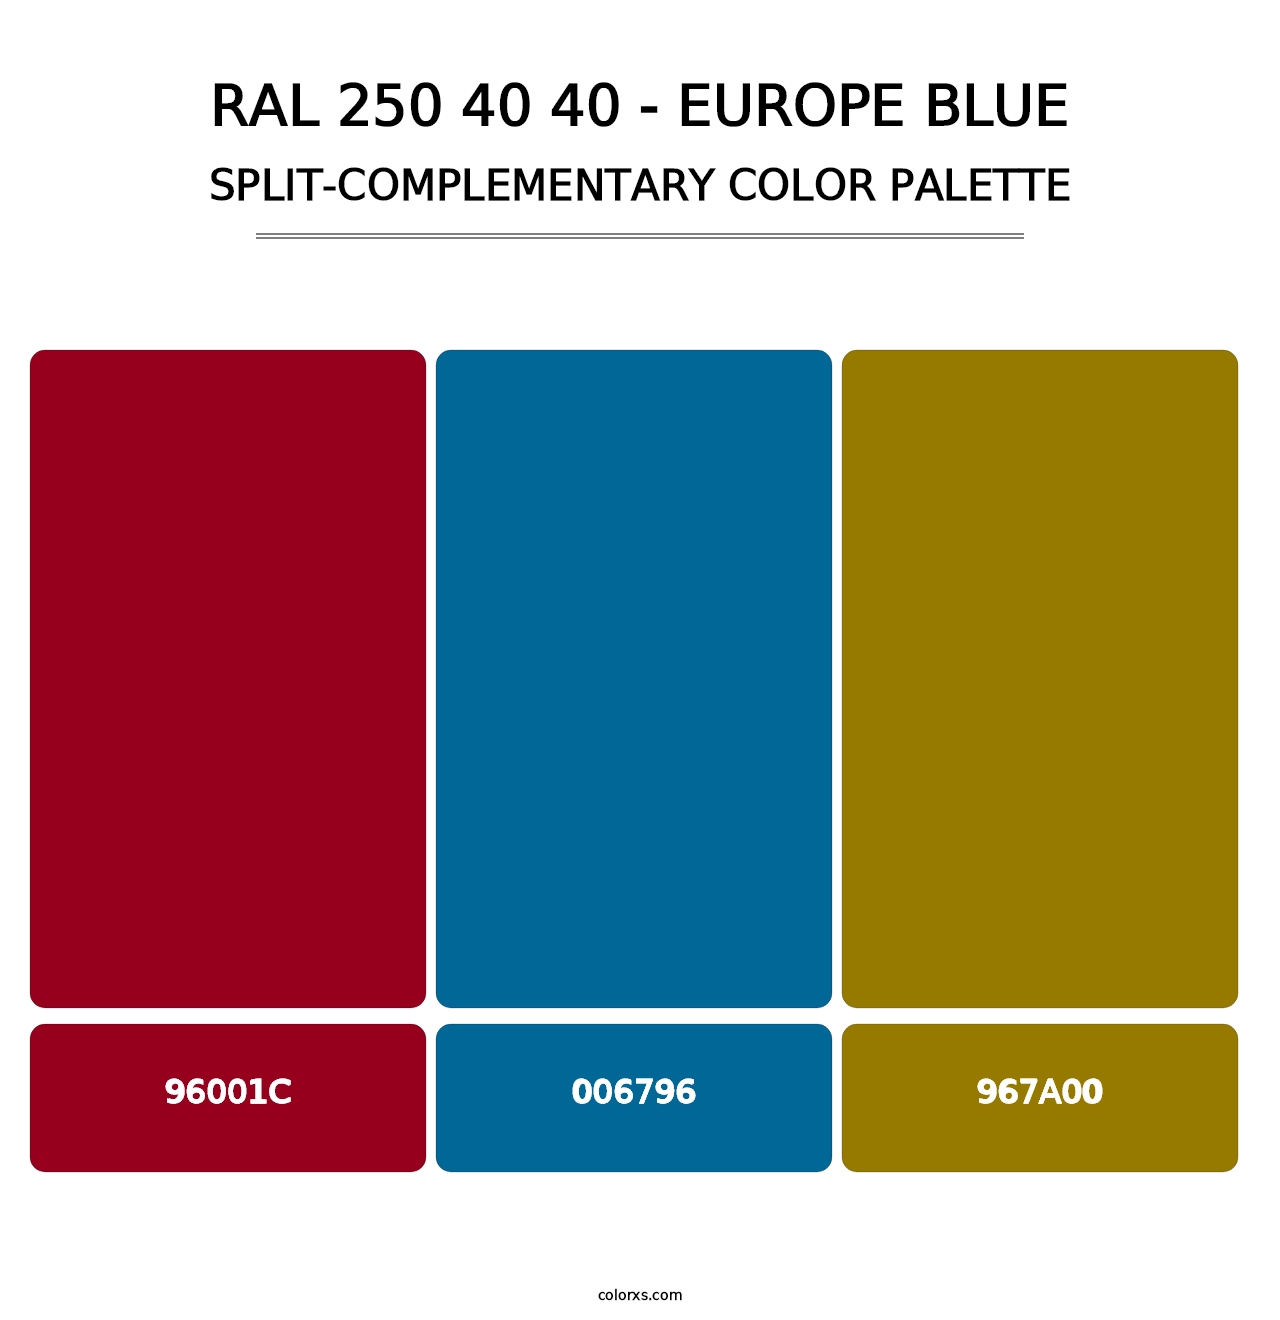 RAL 250 40 40 - Europe Blue - Split-Complementary Color Palette